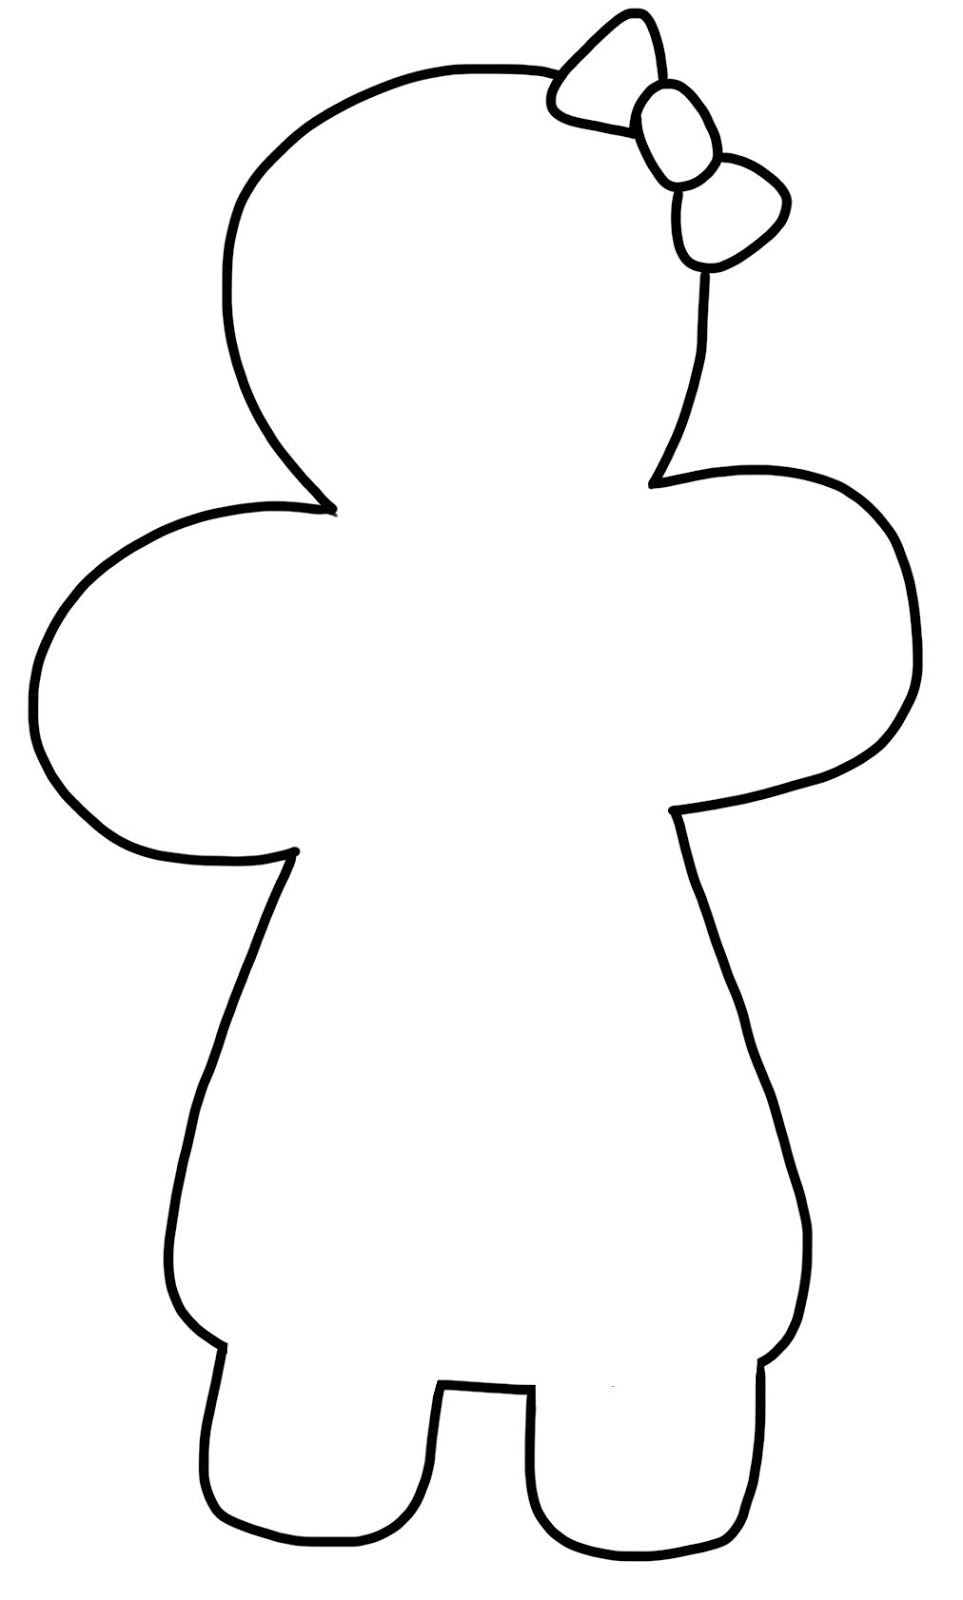 Free Gingerbread Man Outline, Download Free Gingerbread Man Outline png